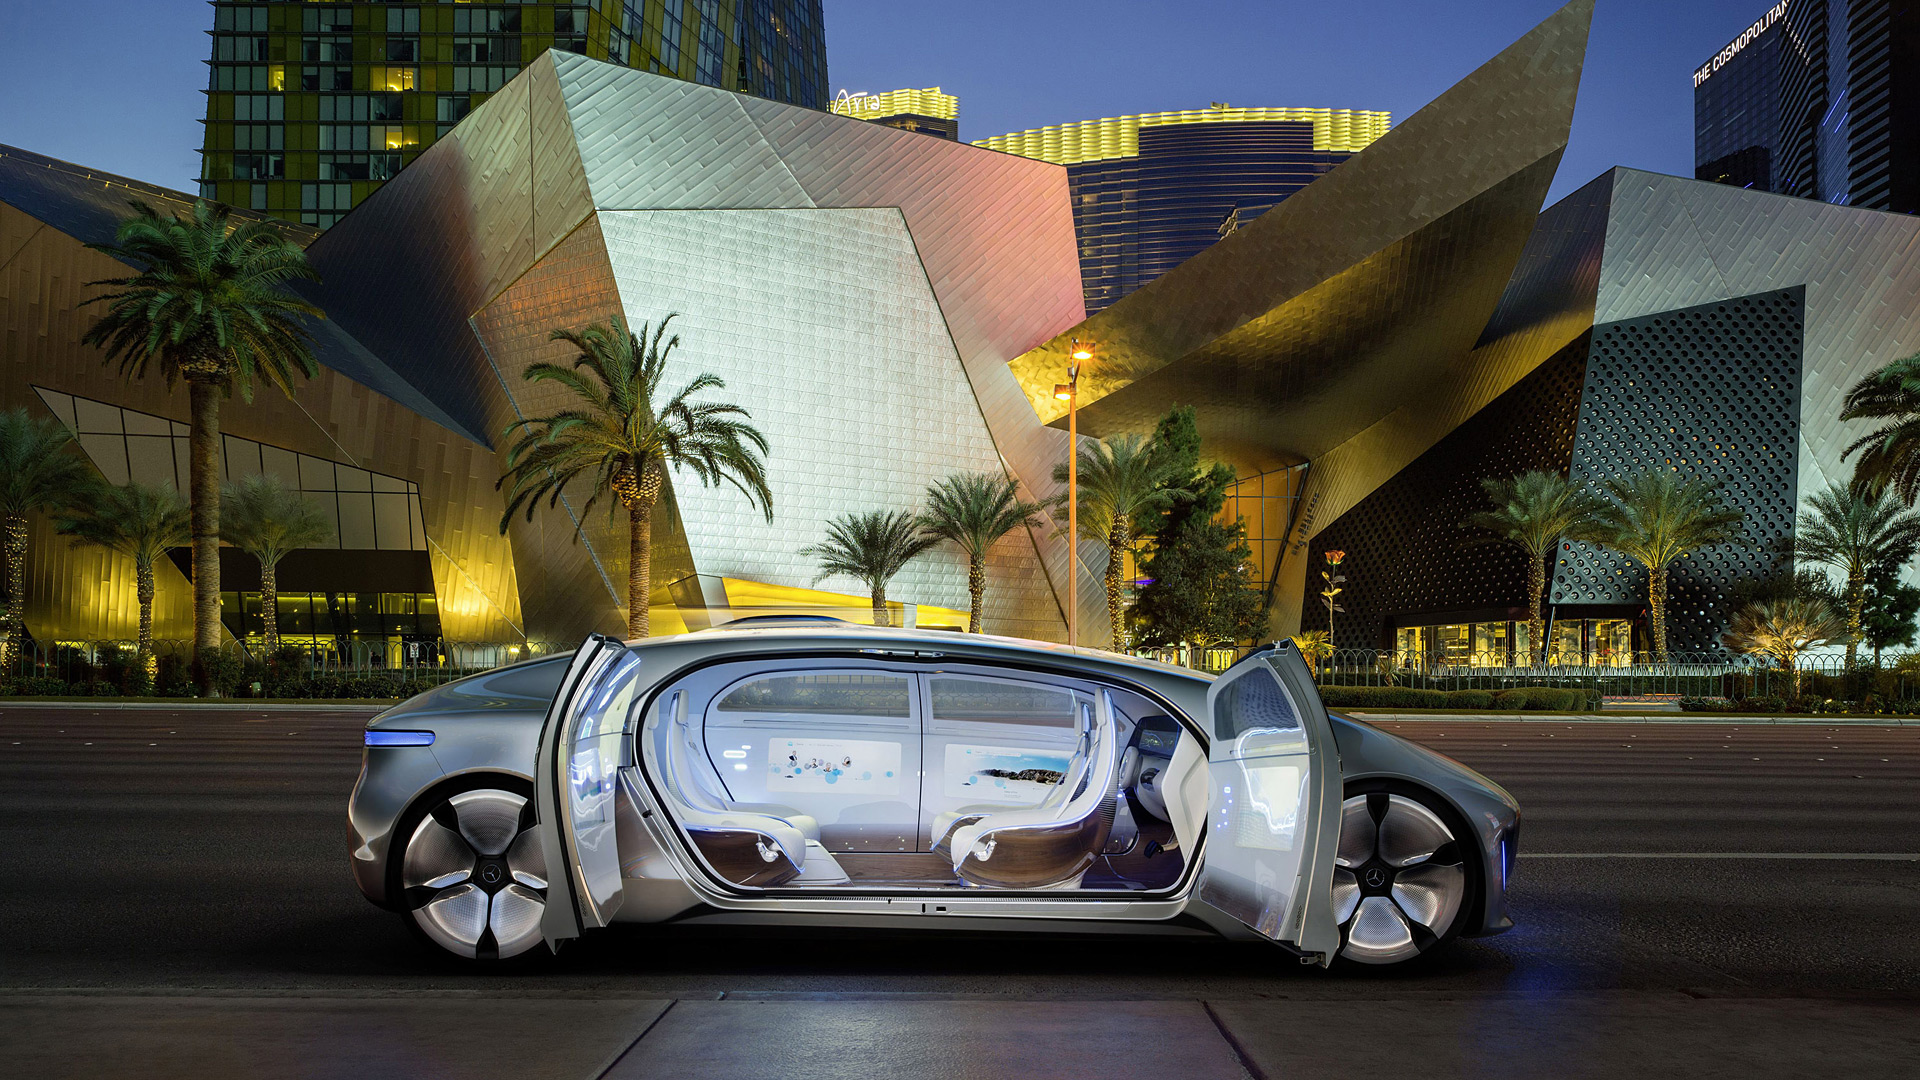  2015 Mercedes-Benz F015 Luxury In Motion Concept Wallpaper.